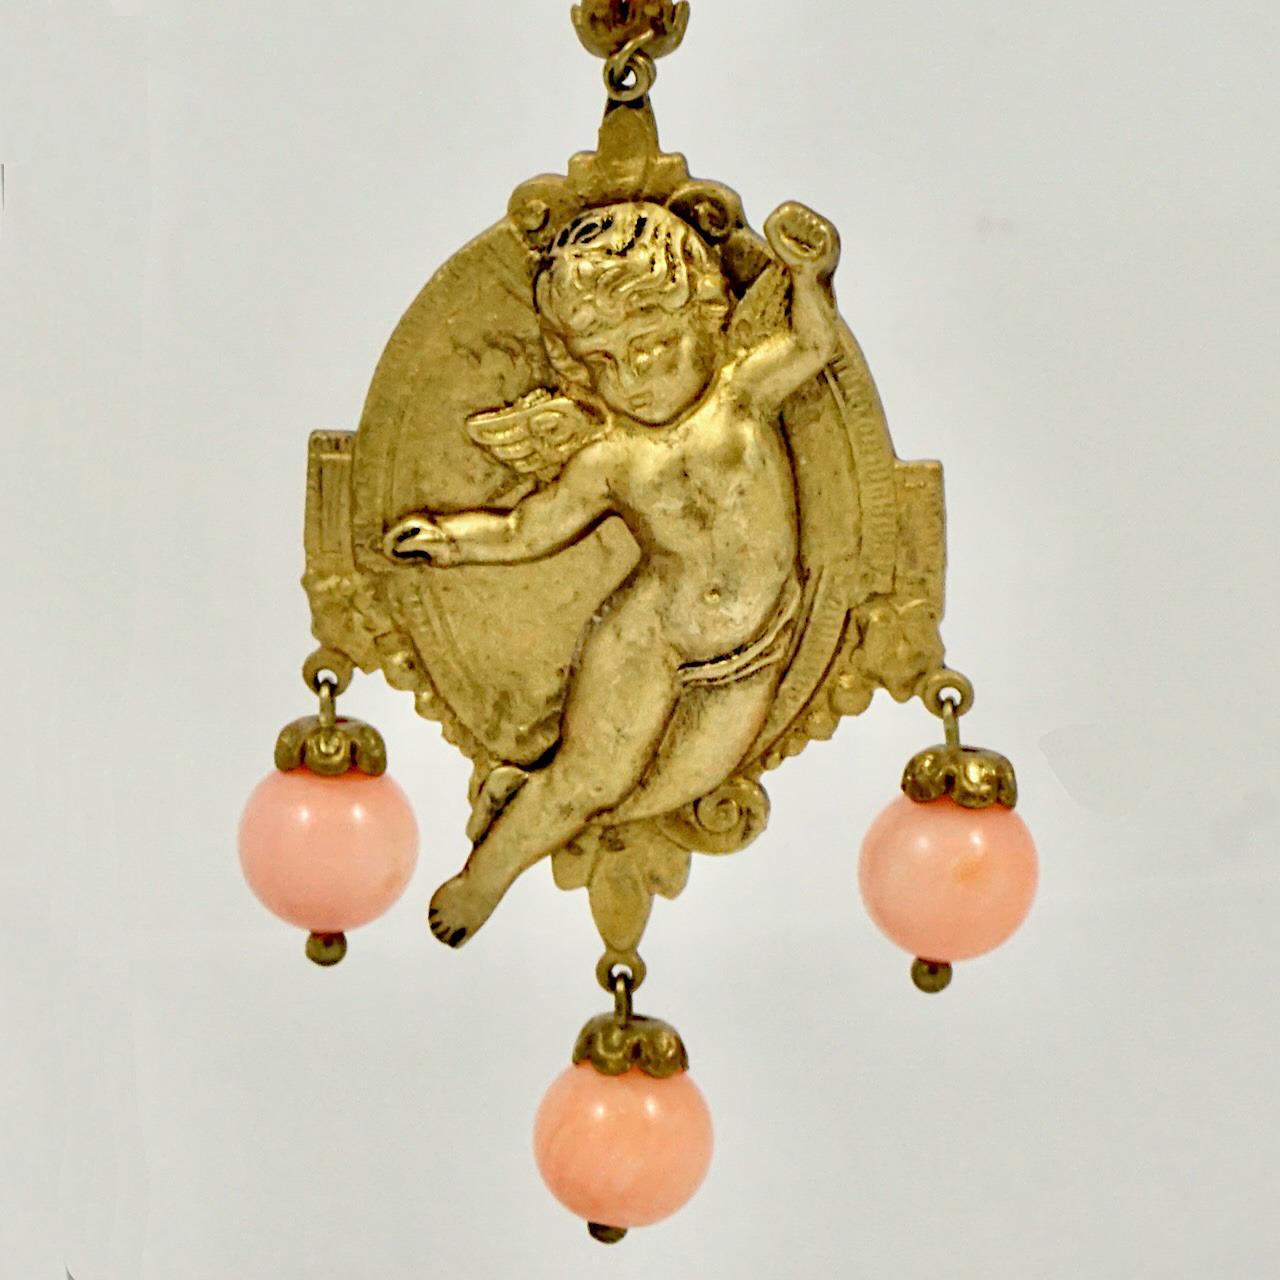 Fabulous gold tone cherub lever back earrings, with lovely angel skin coral drops. Measuring length 8.5 cm / 3.3 inches including the lever backs, by width 2.85 cm / 1.1 inch.

This is a beautiful pair of vintage cherub earrings, circa 1960s. A rare